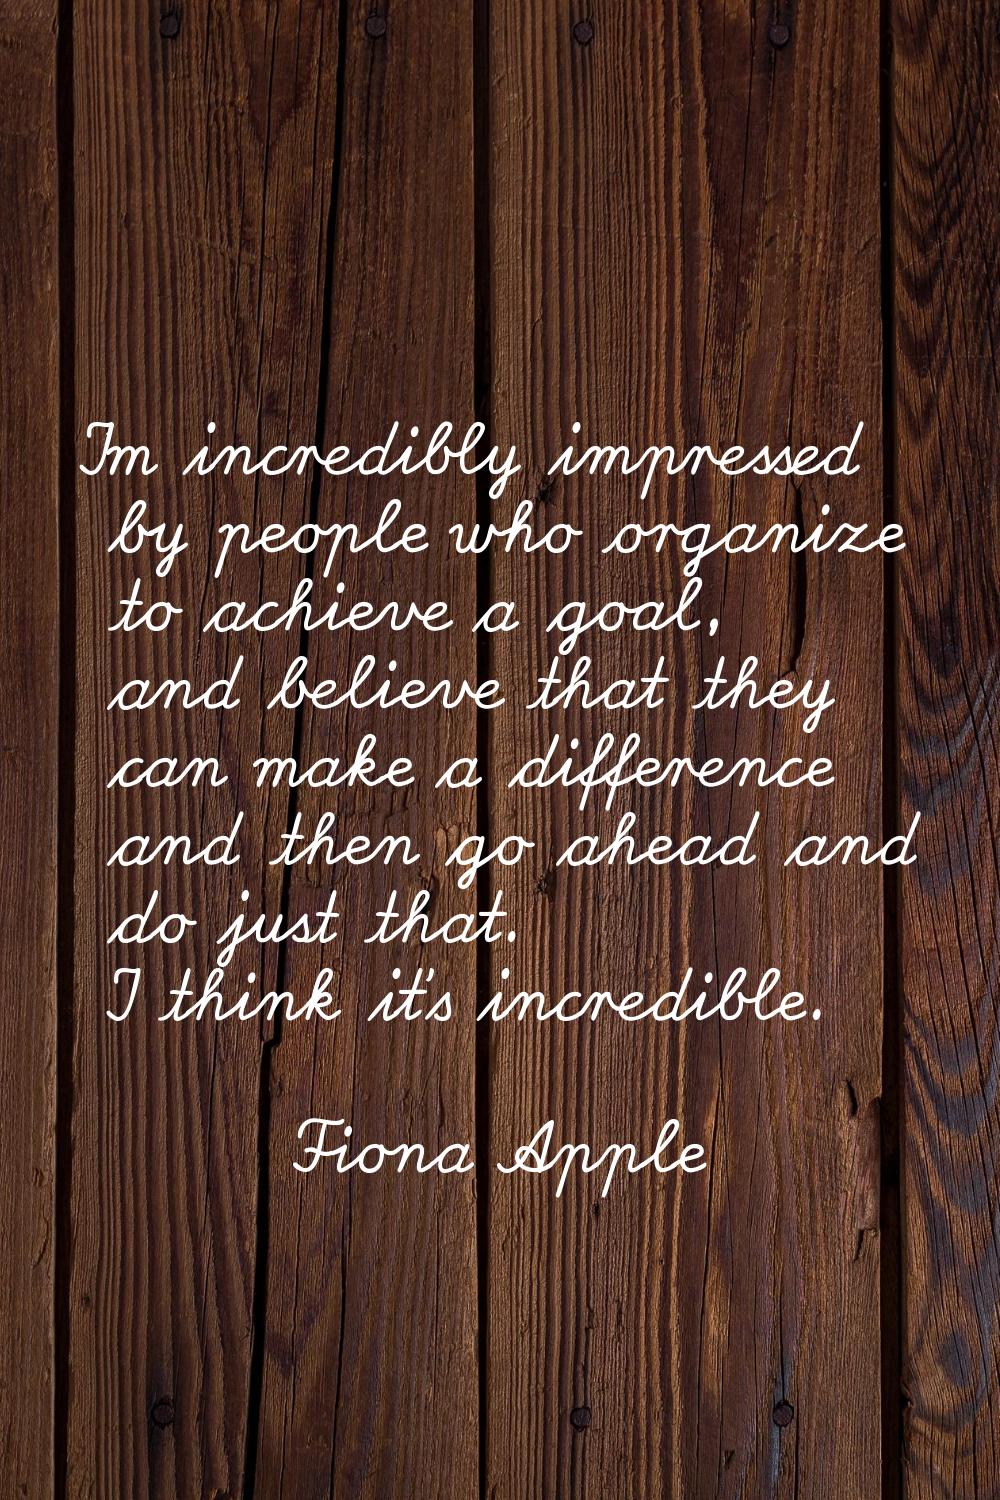 I'm incredibly impressed by people who organize to achieve a goal, and believe that they can make a